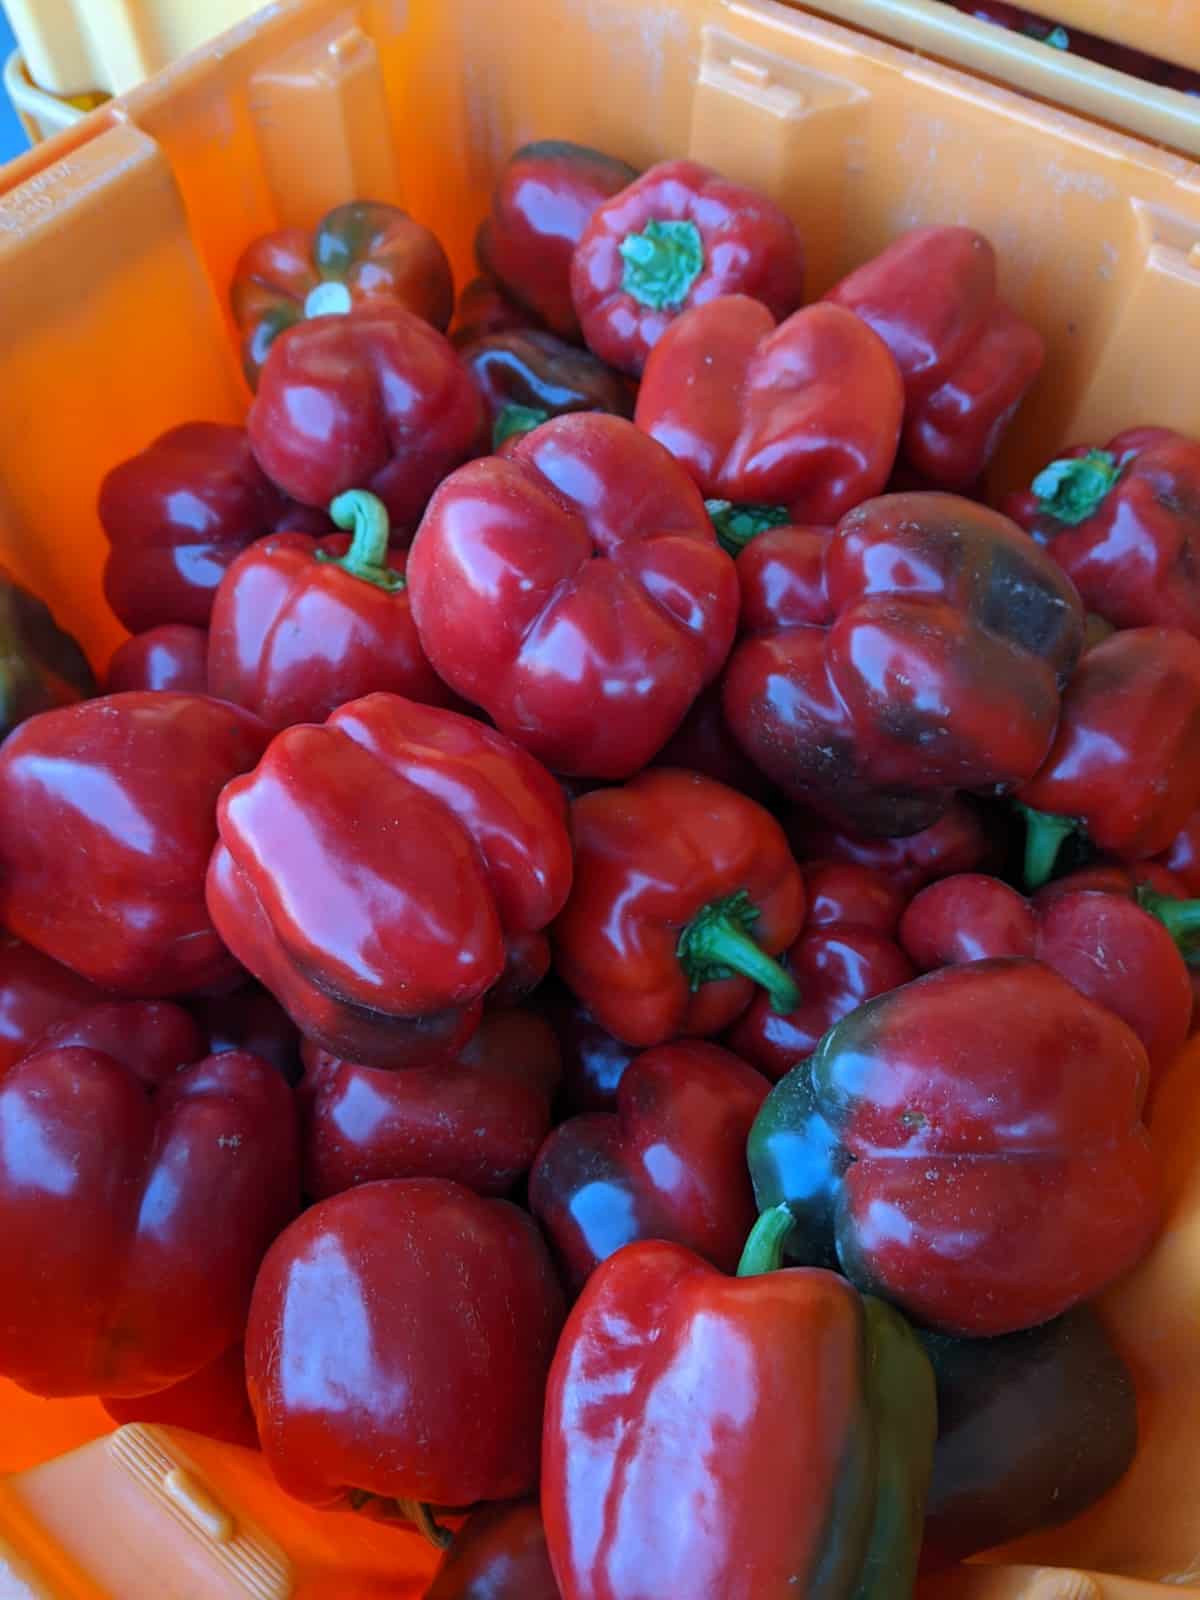 Sweet red bell peppers!